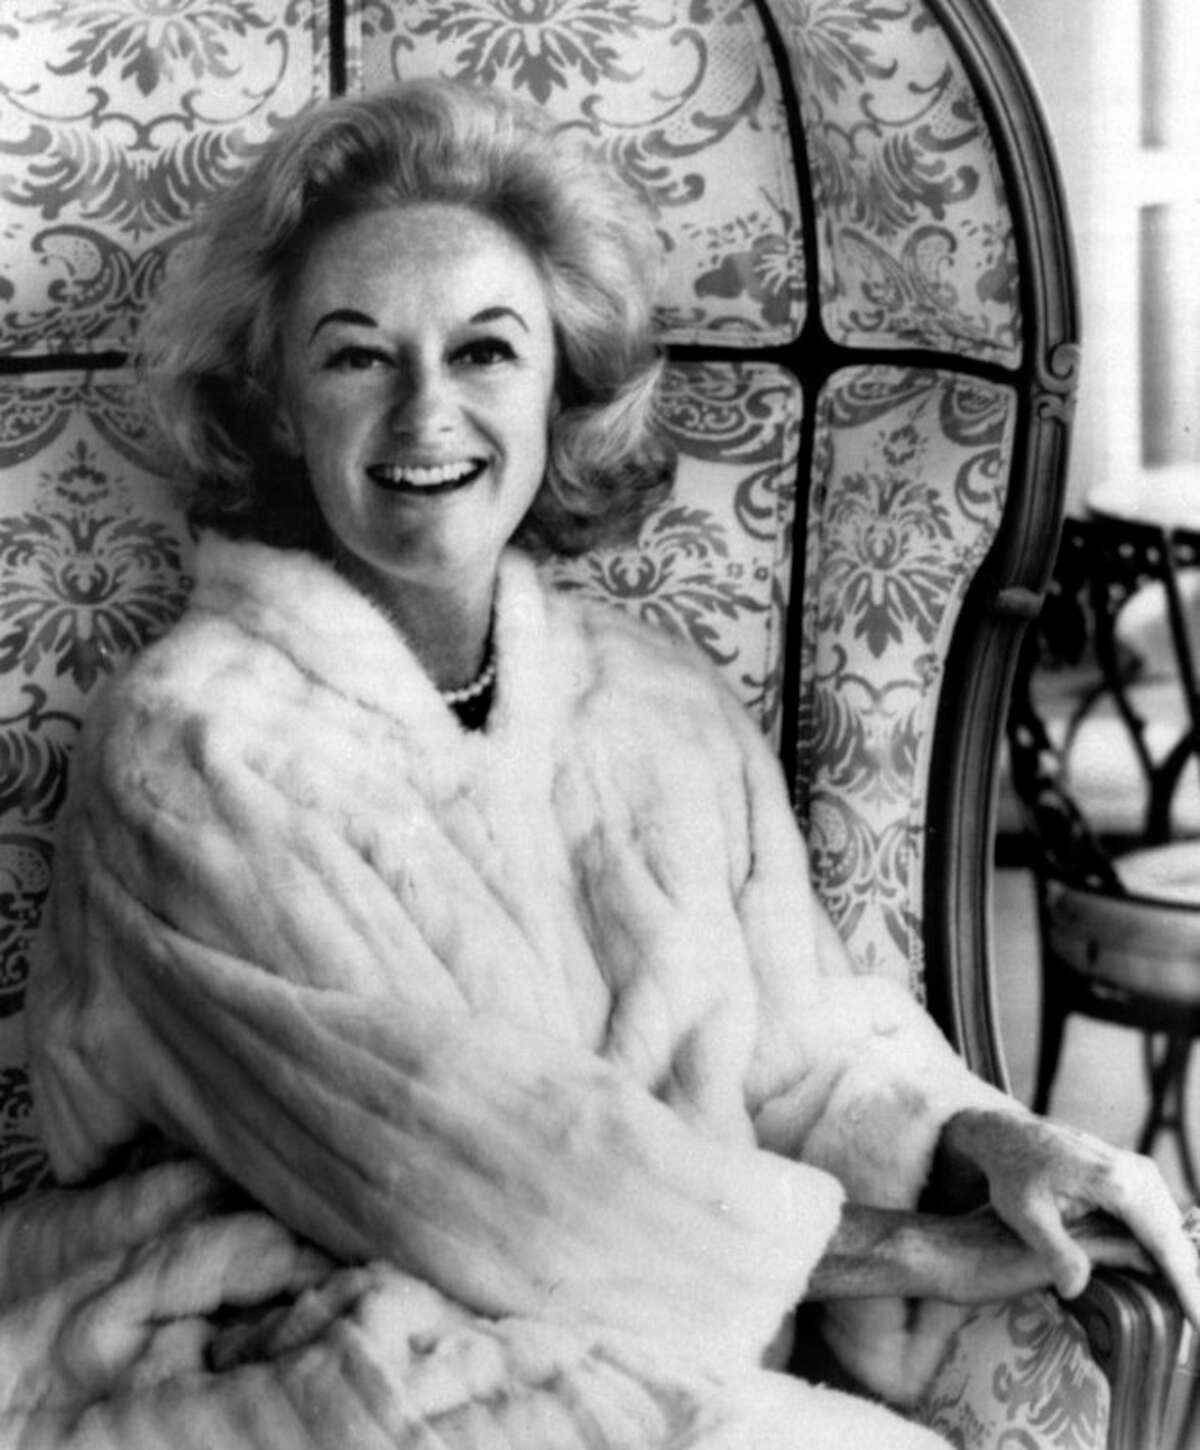 FILE--In this October 1969 file photo, Comedian Phyllis Diller poses for a portrait. Diller, the housewife turned humorist who aimed some of her sharpest barbs at herself, died Monday, Aug. 20, 2012, at age 95 in Los Angeles. (AP Photo/File)